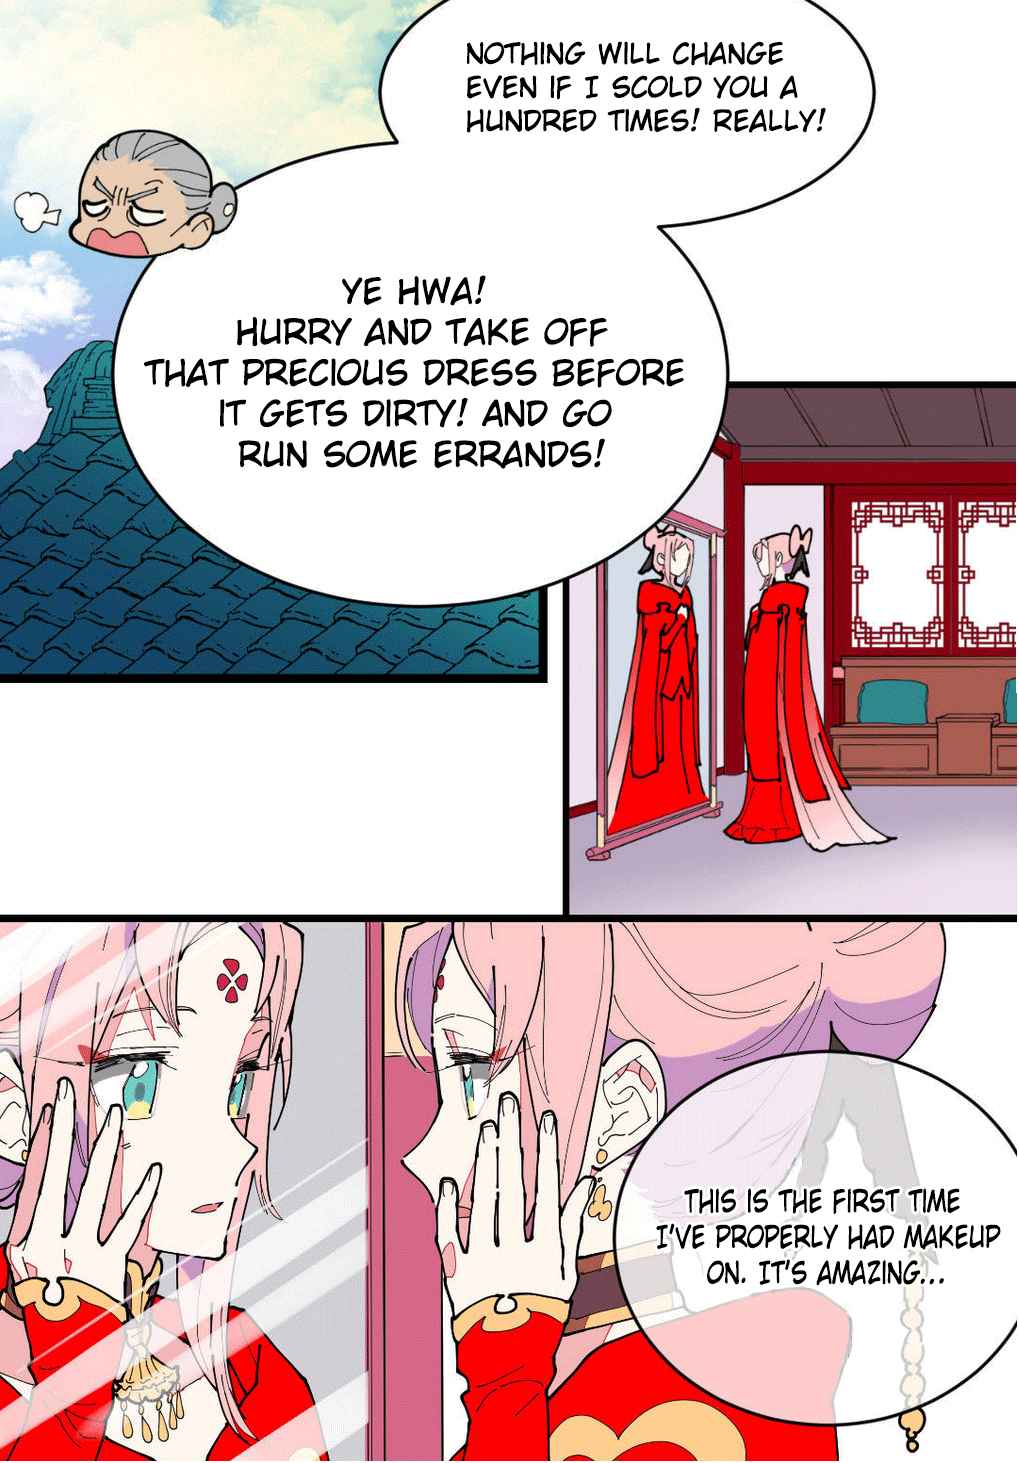 The Two Princesses Ch. 1